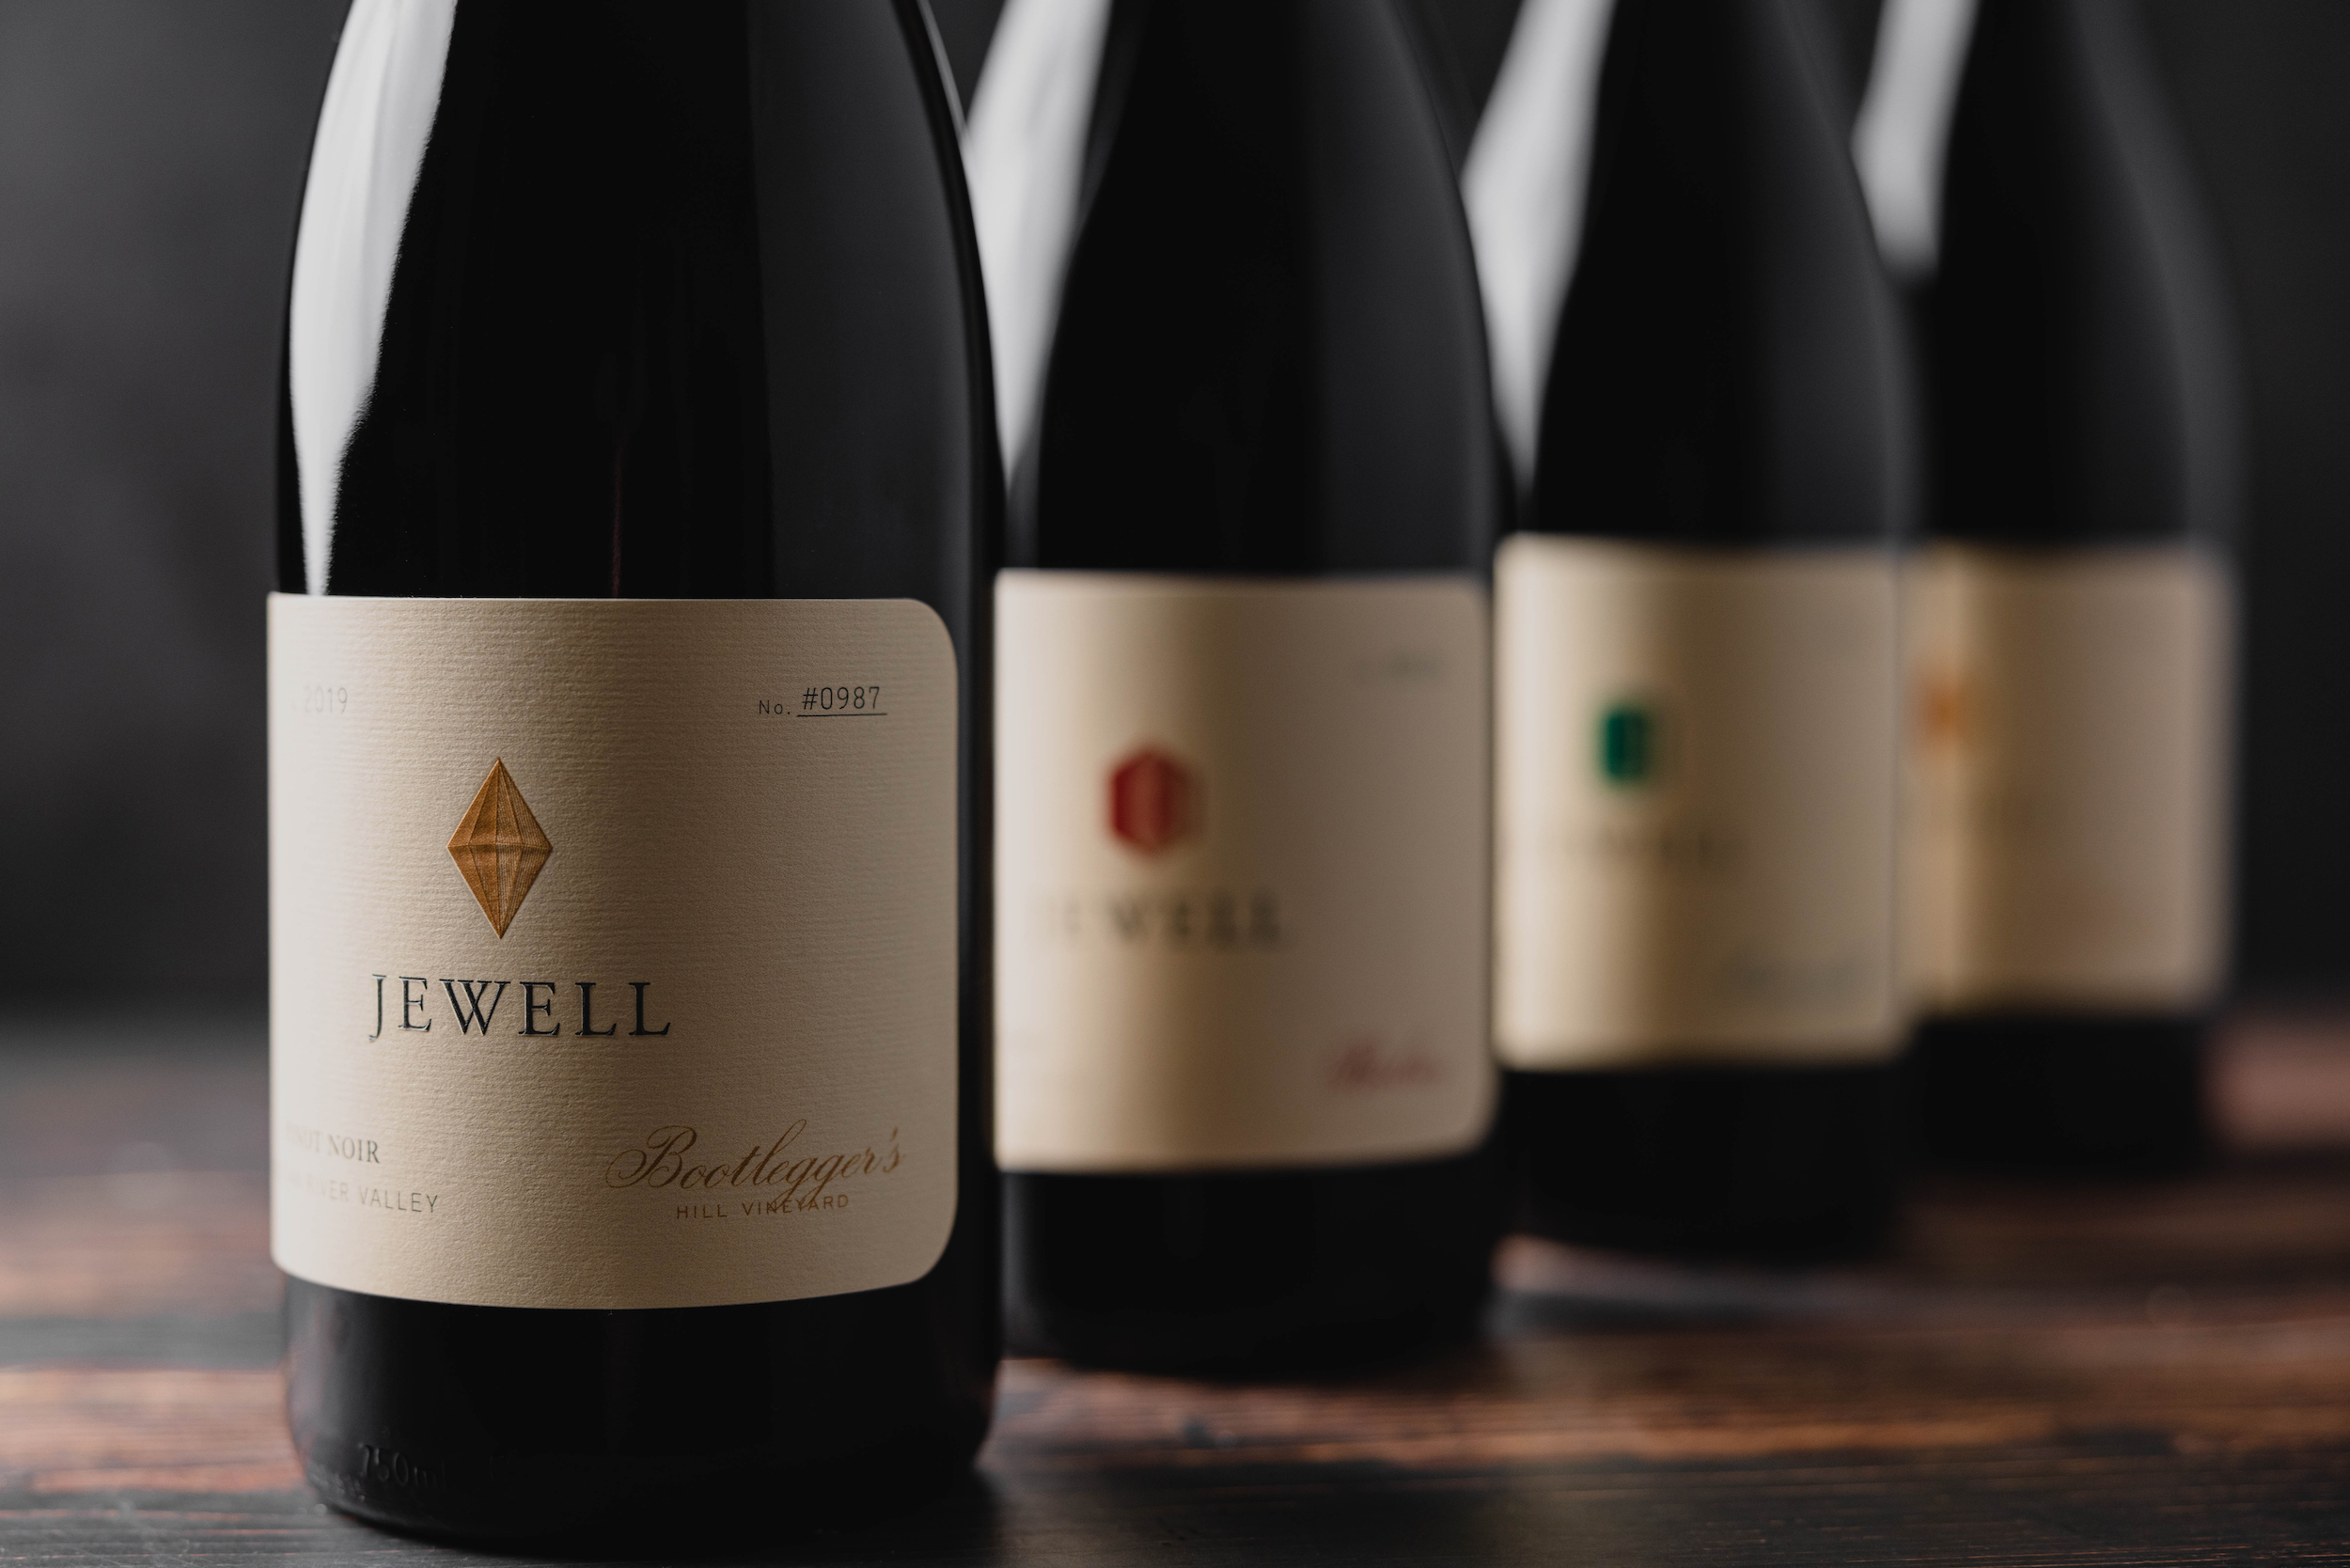 Jewell Wine bottles lined up in a row